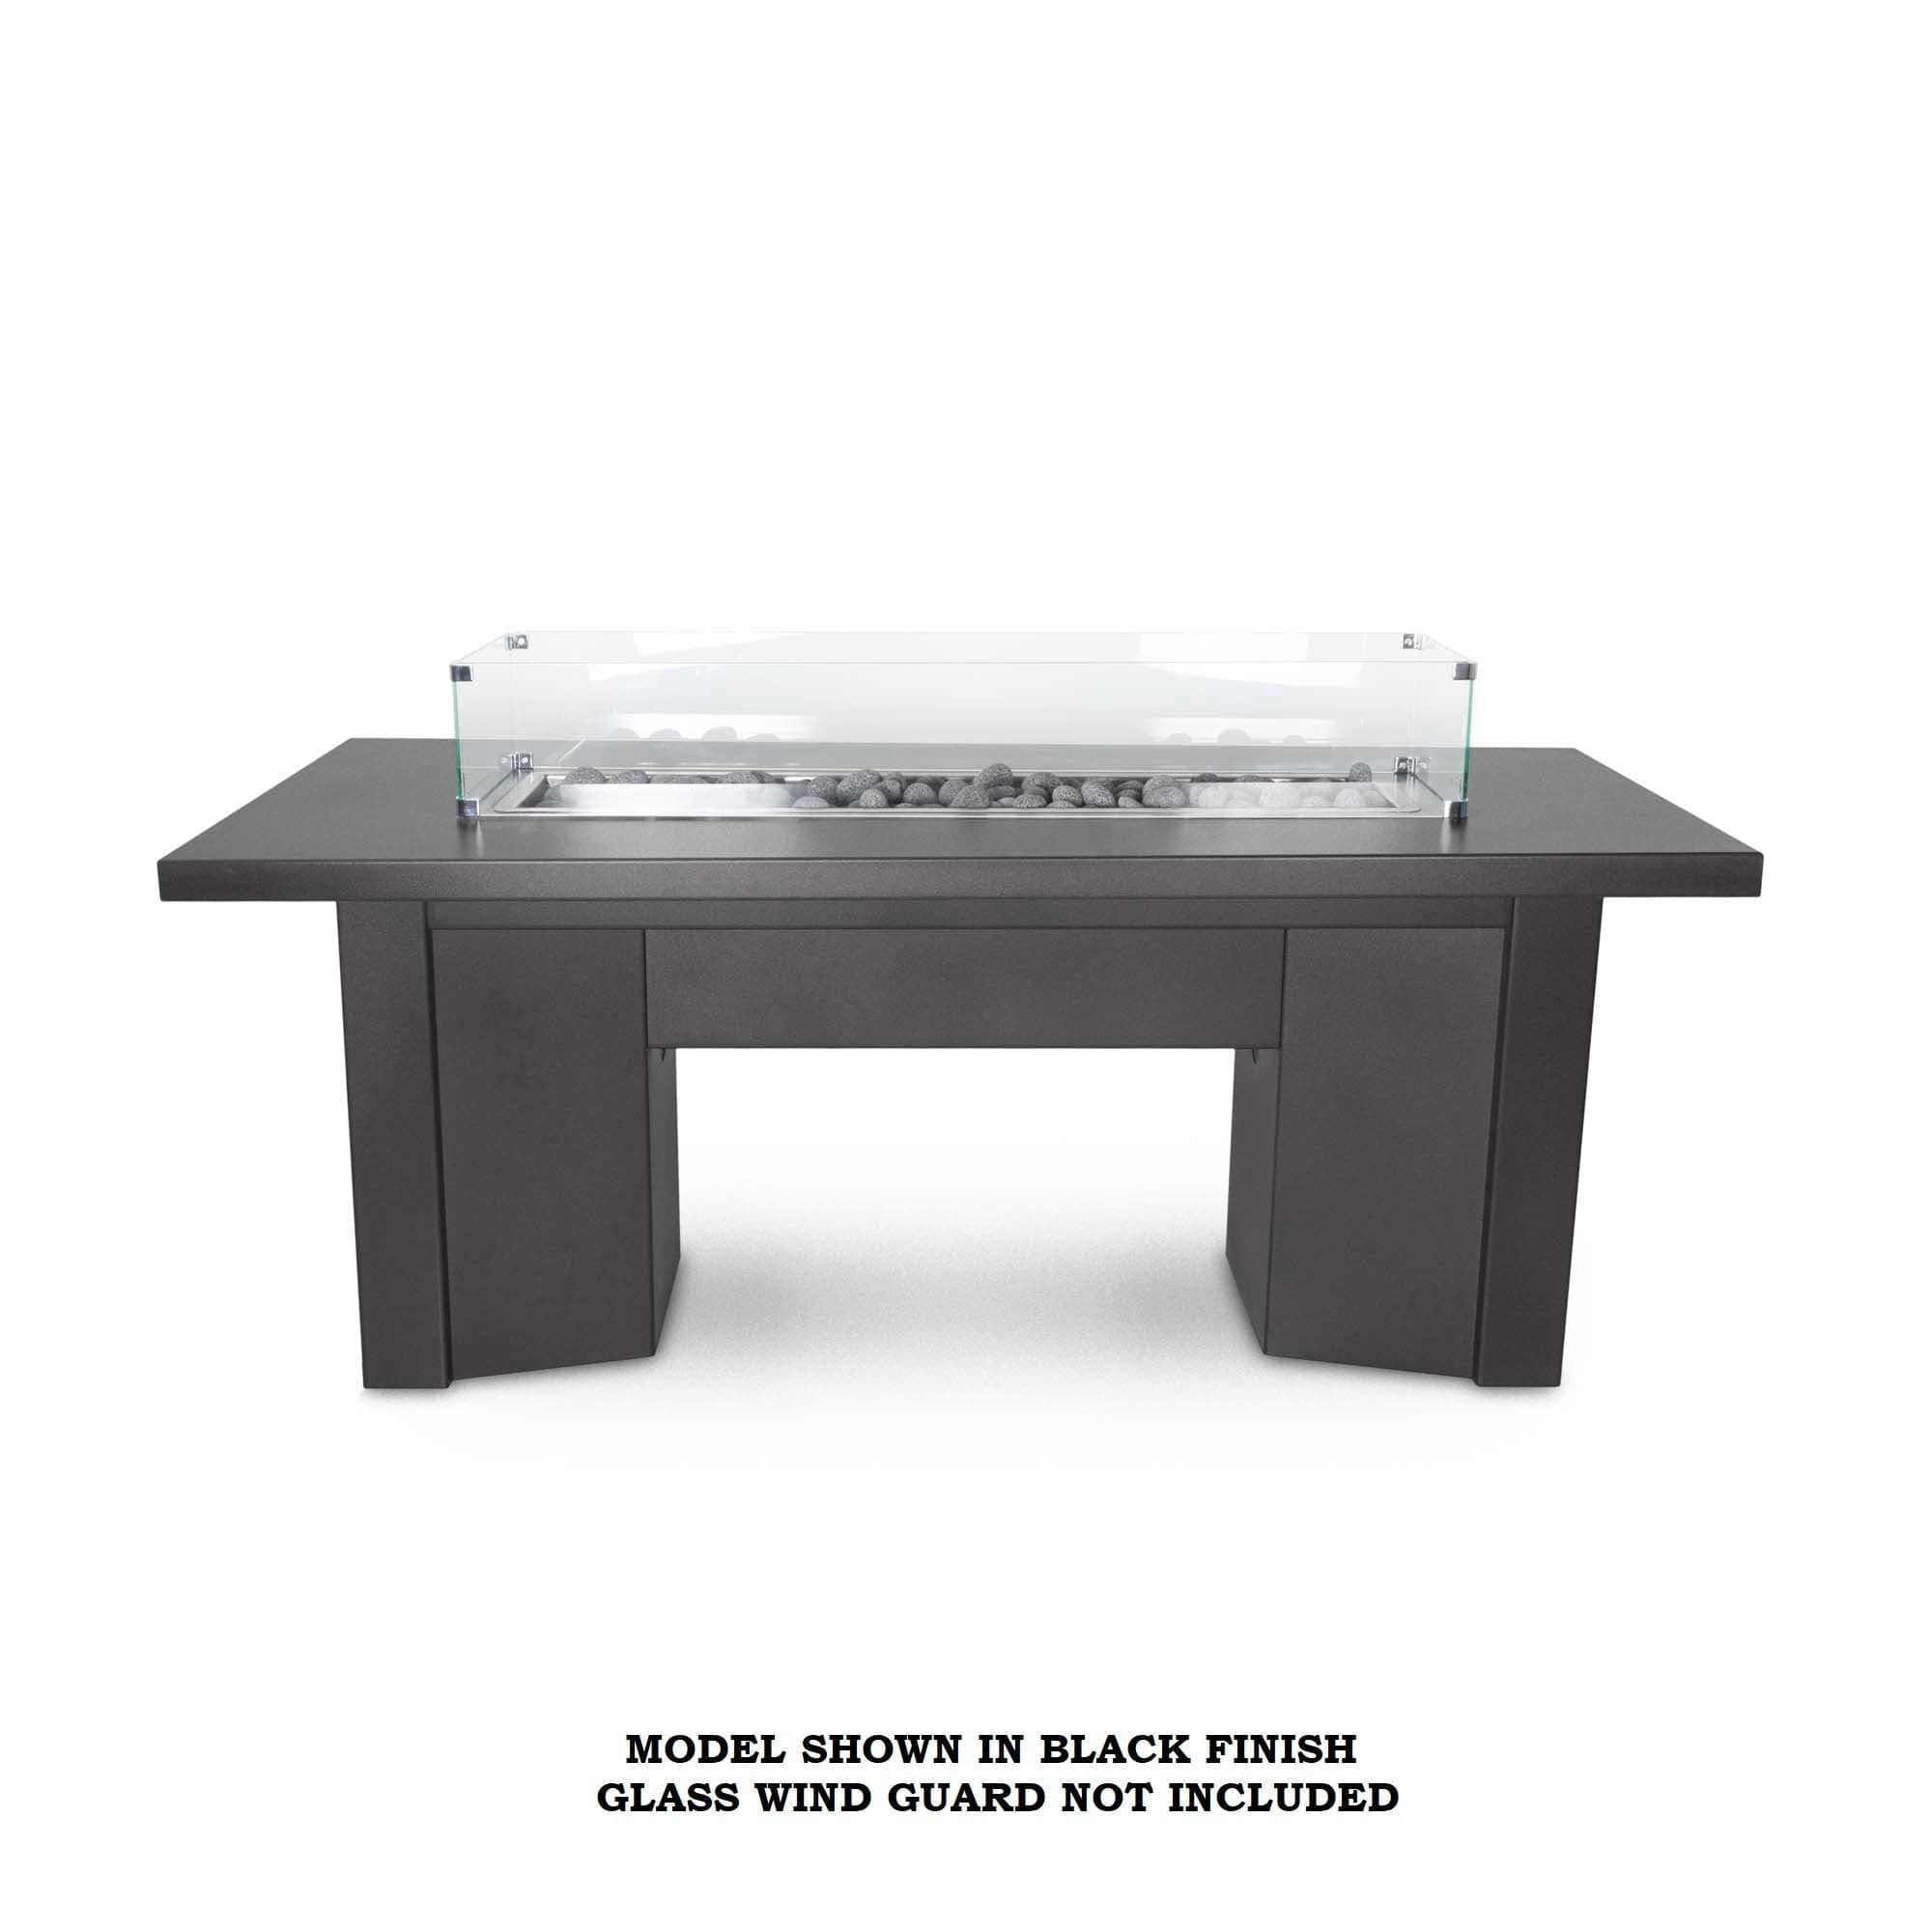 The Outdoor Plus Fire Features Match Lit Ignition / Black (-BLK) / Natural Gas The Outdoor Plus 48" Alameda Linear Powder Coated Rectangle Fire Table / OPT-ALMPC48, OPT-ALMPC48FSML, OPT-ALMPC48FSEN, OPT-ALMPC48E12V, OPT-ALMPC48EKIT